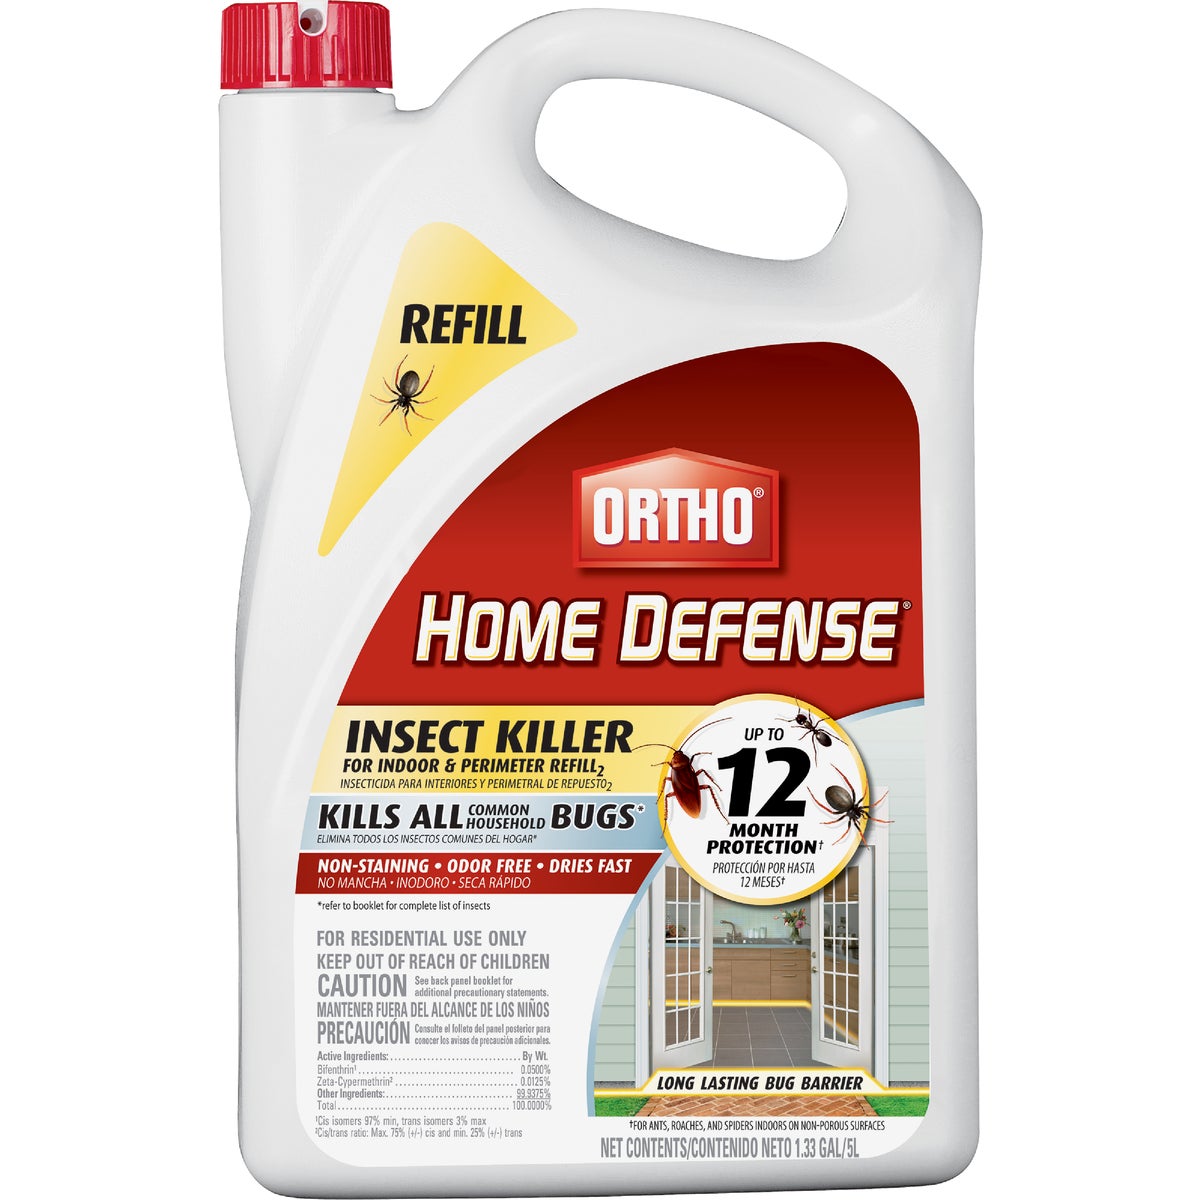 Ortho Home Defense 1 Gal. Ready To Use Refill Indoor & Perimeter Insect Killer